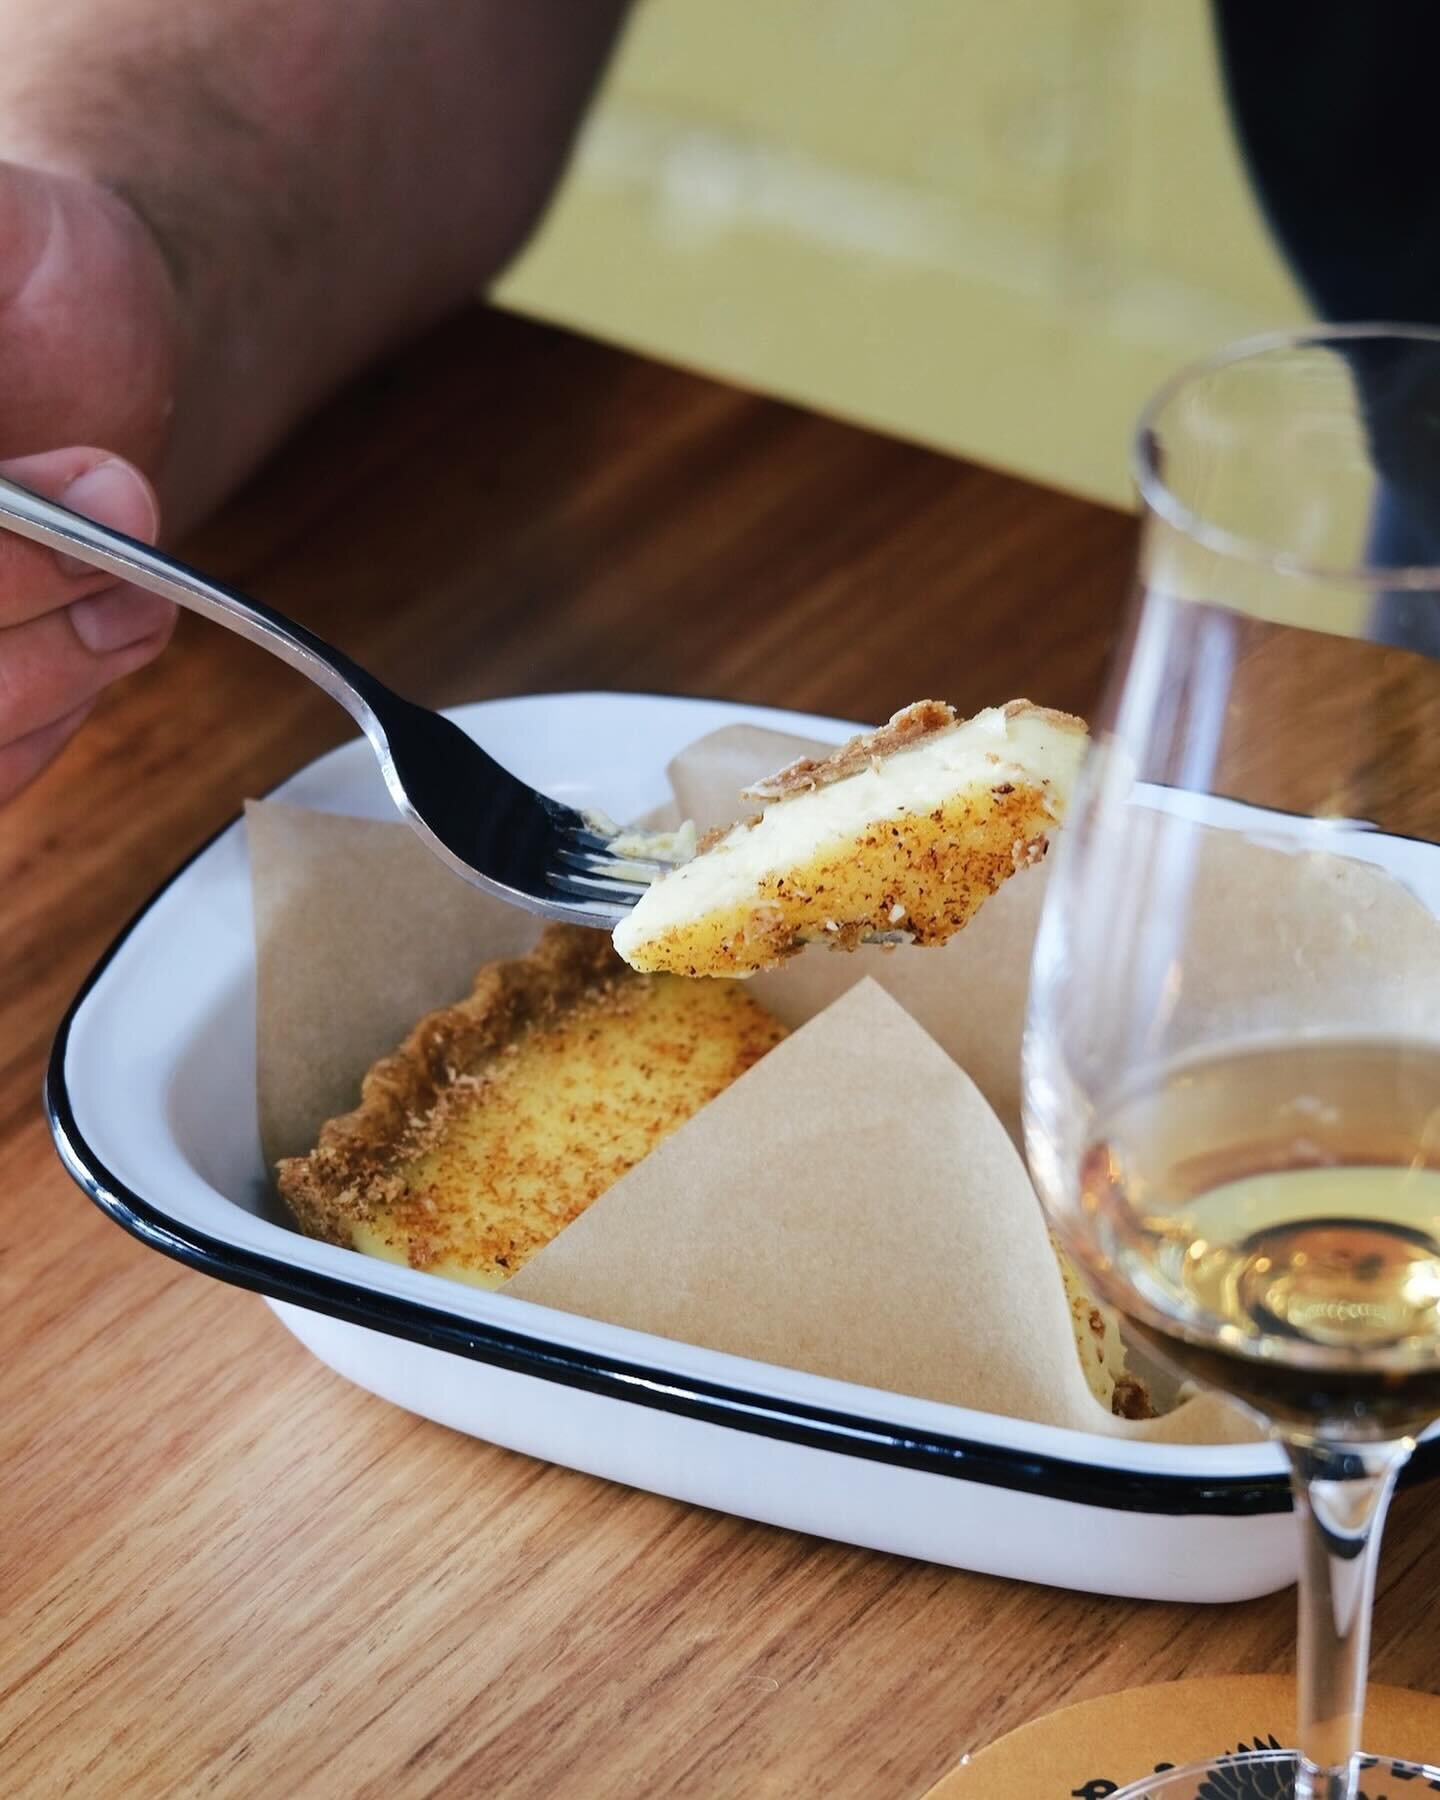 If you haven&rsquo;t snuck in a dessert at Overland and tried Marty&rsquo;s custard tart yet, oooooh you&rsquo;re in for a treat! 

And we highly recommend pairing a slice with the smooth and spicy I.W. Harper Kentucky Straight Bourbon Whiskey 15-yea